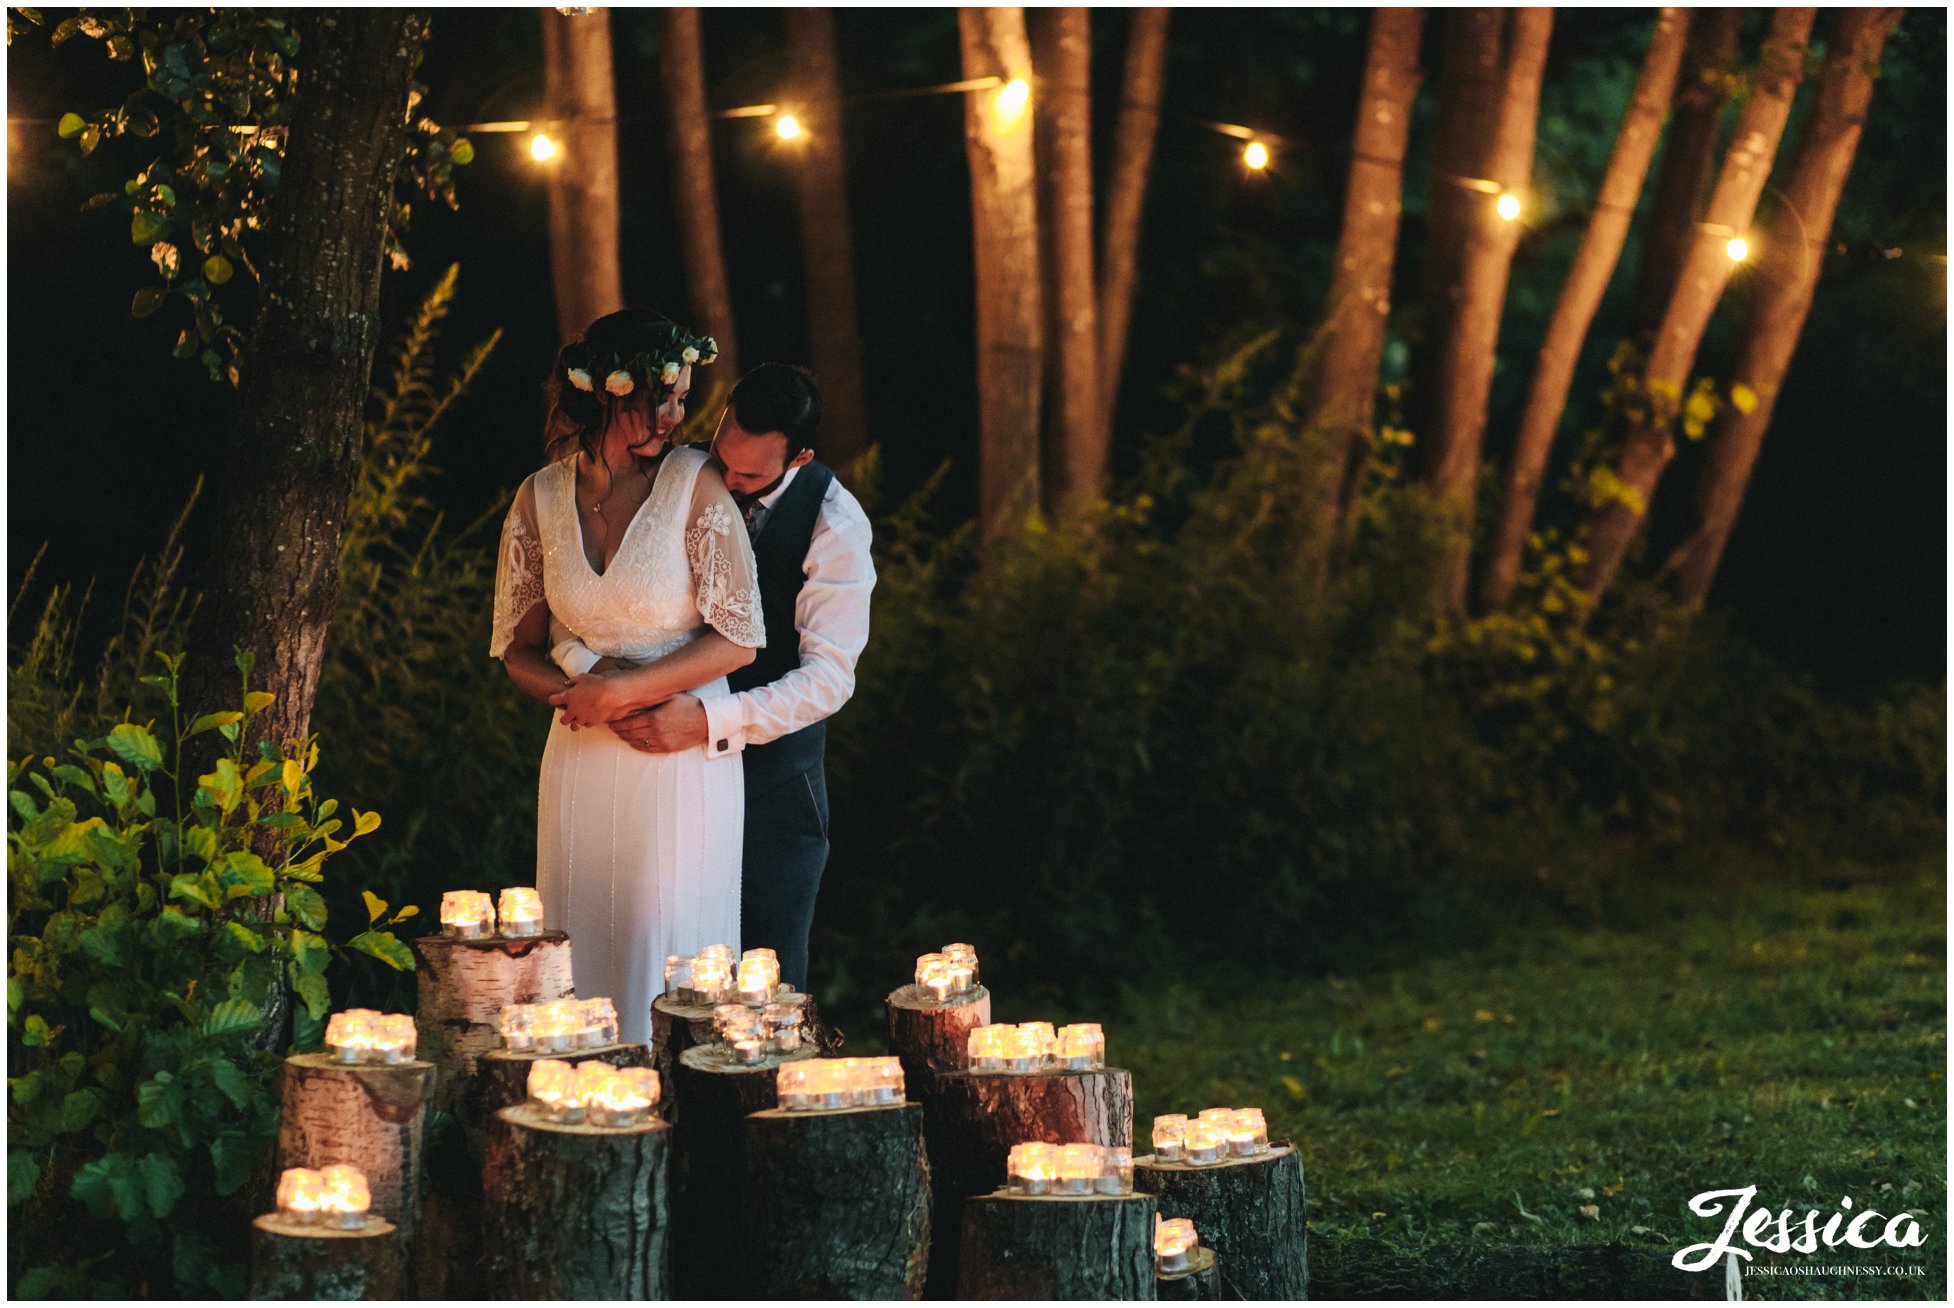 newly wed's embrace in front of lit candles as the sun goes down